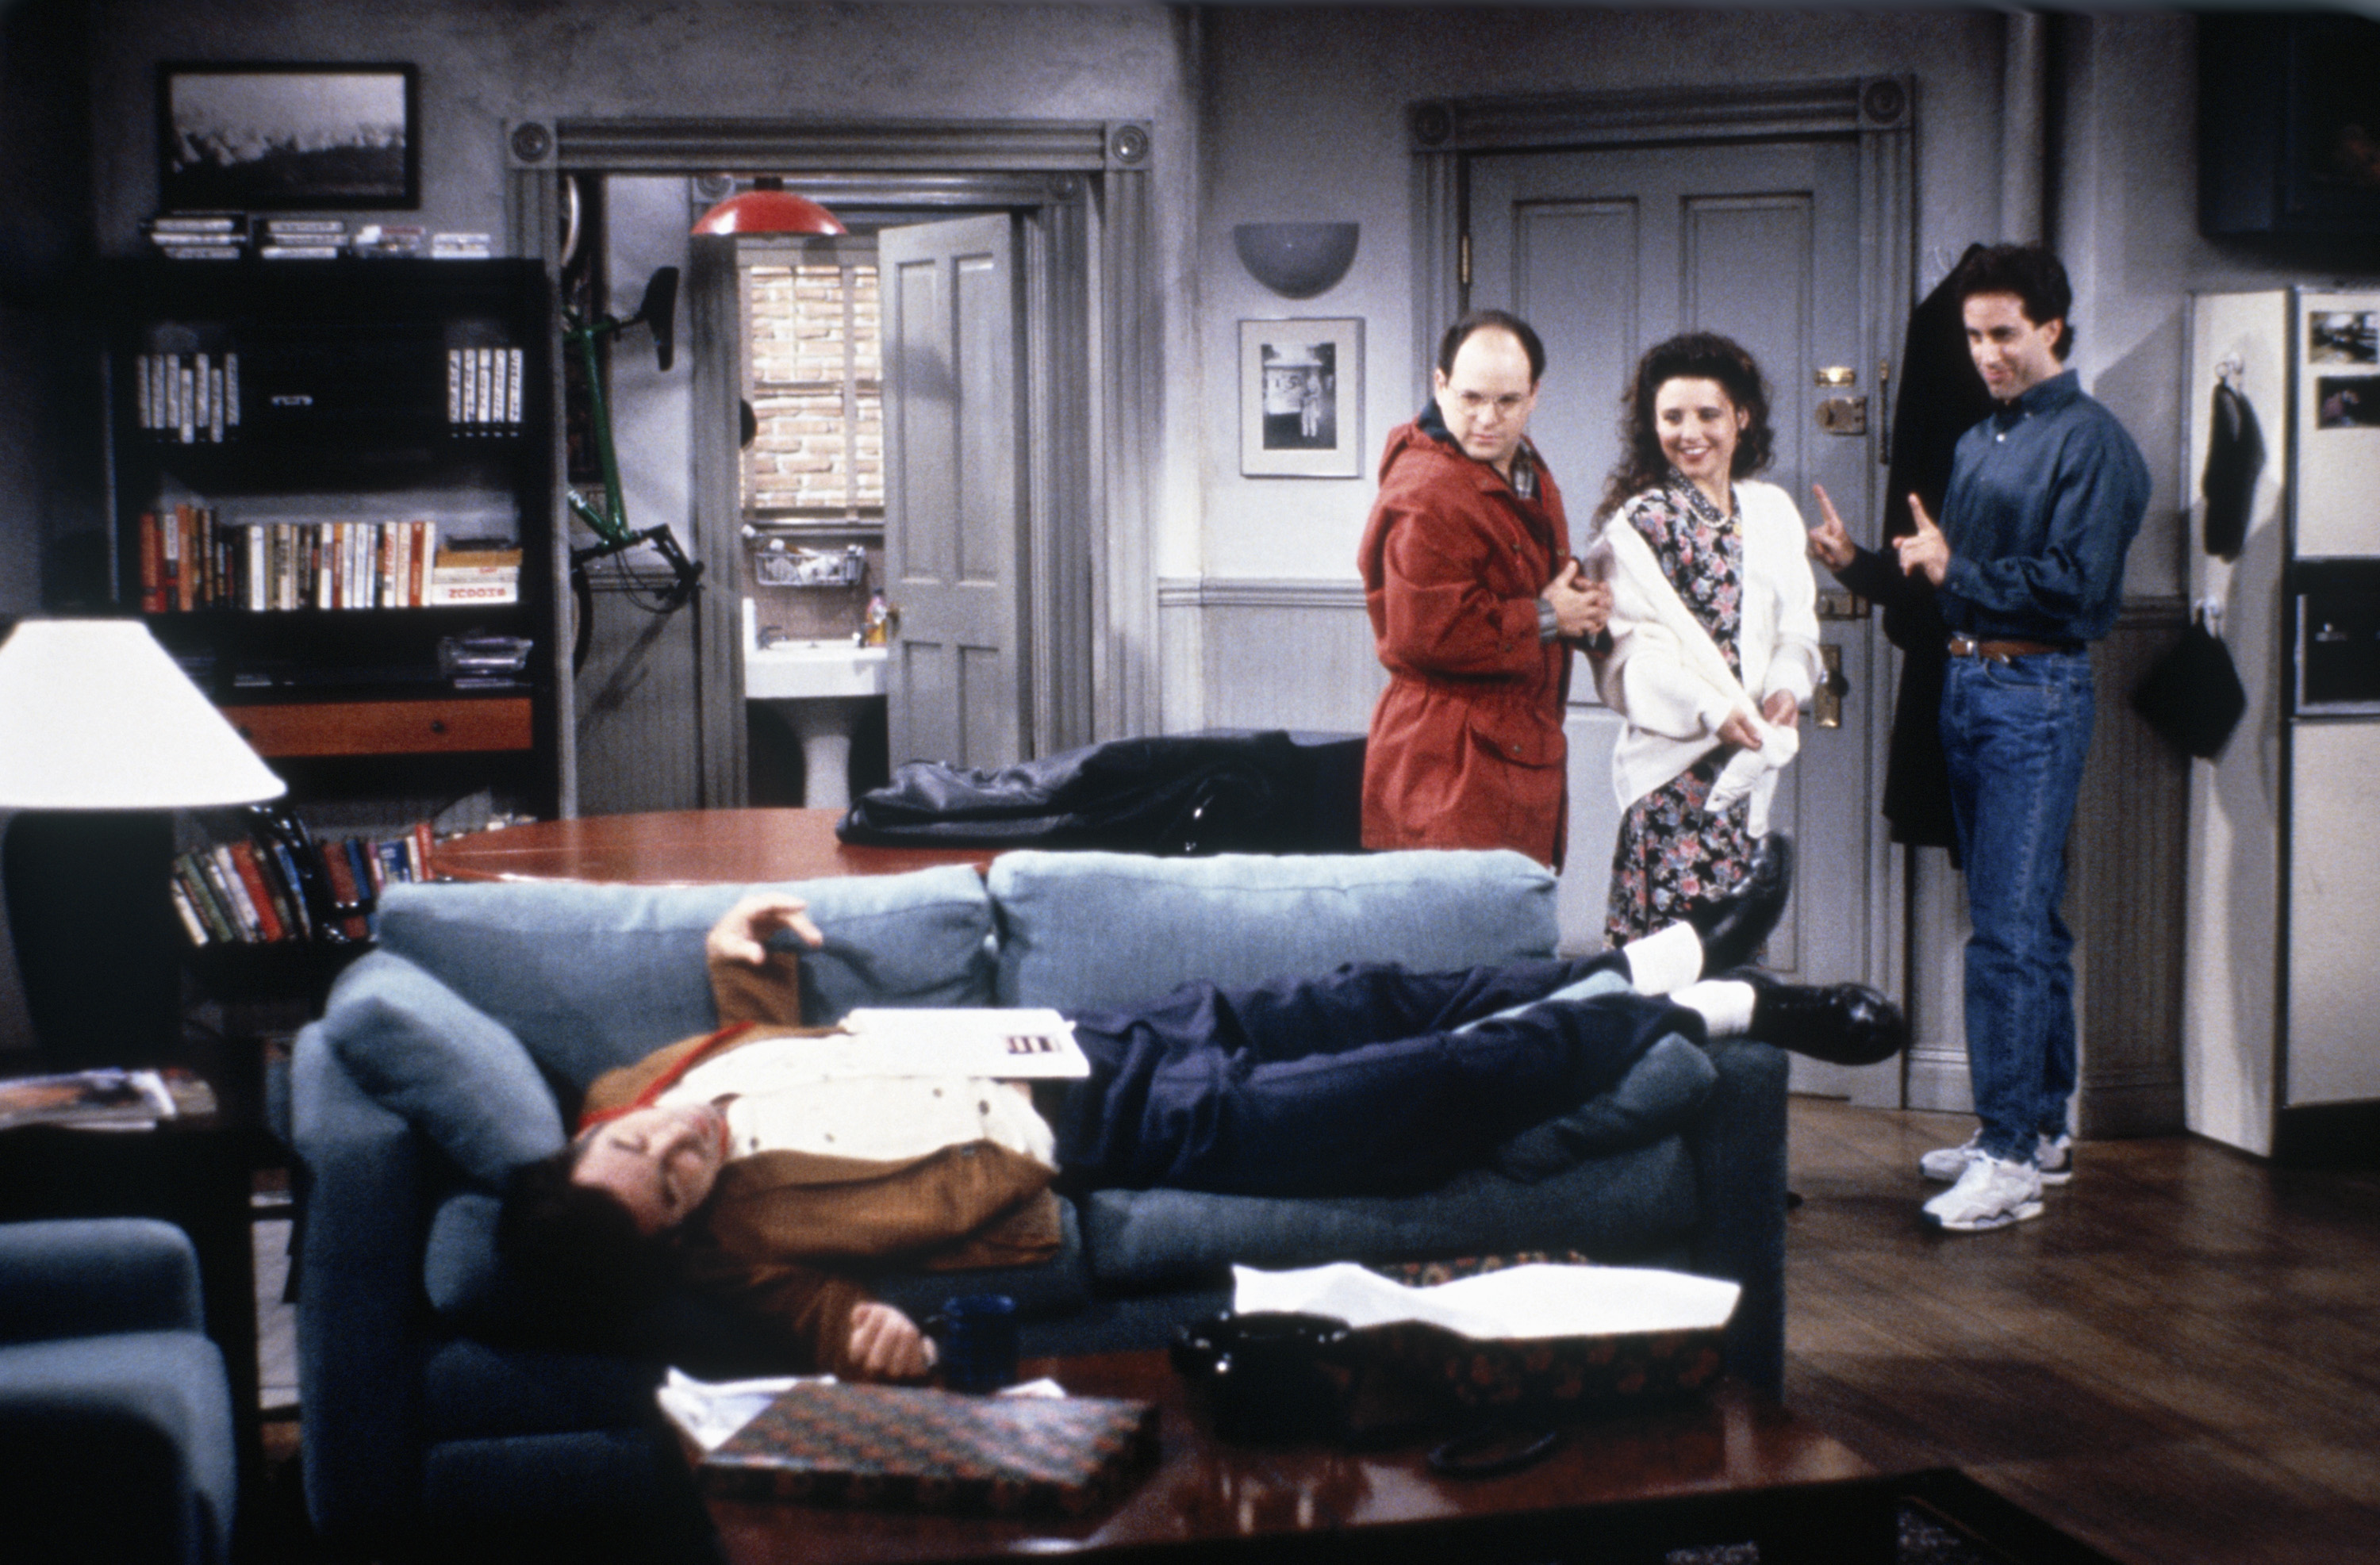 From left, Michael Richards, Jason Alexander, Julia Louis-Dreyfus and Jerry Seinfeld in "Seinfeld." (Maria McCarty/NBCUniversal via Getty Images)